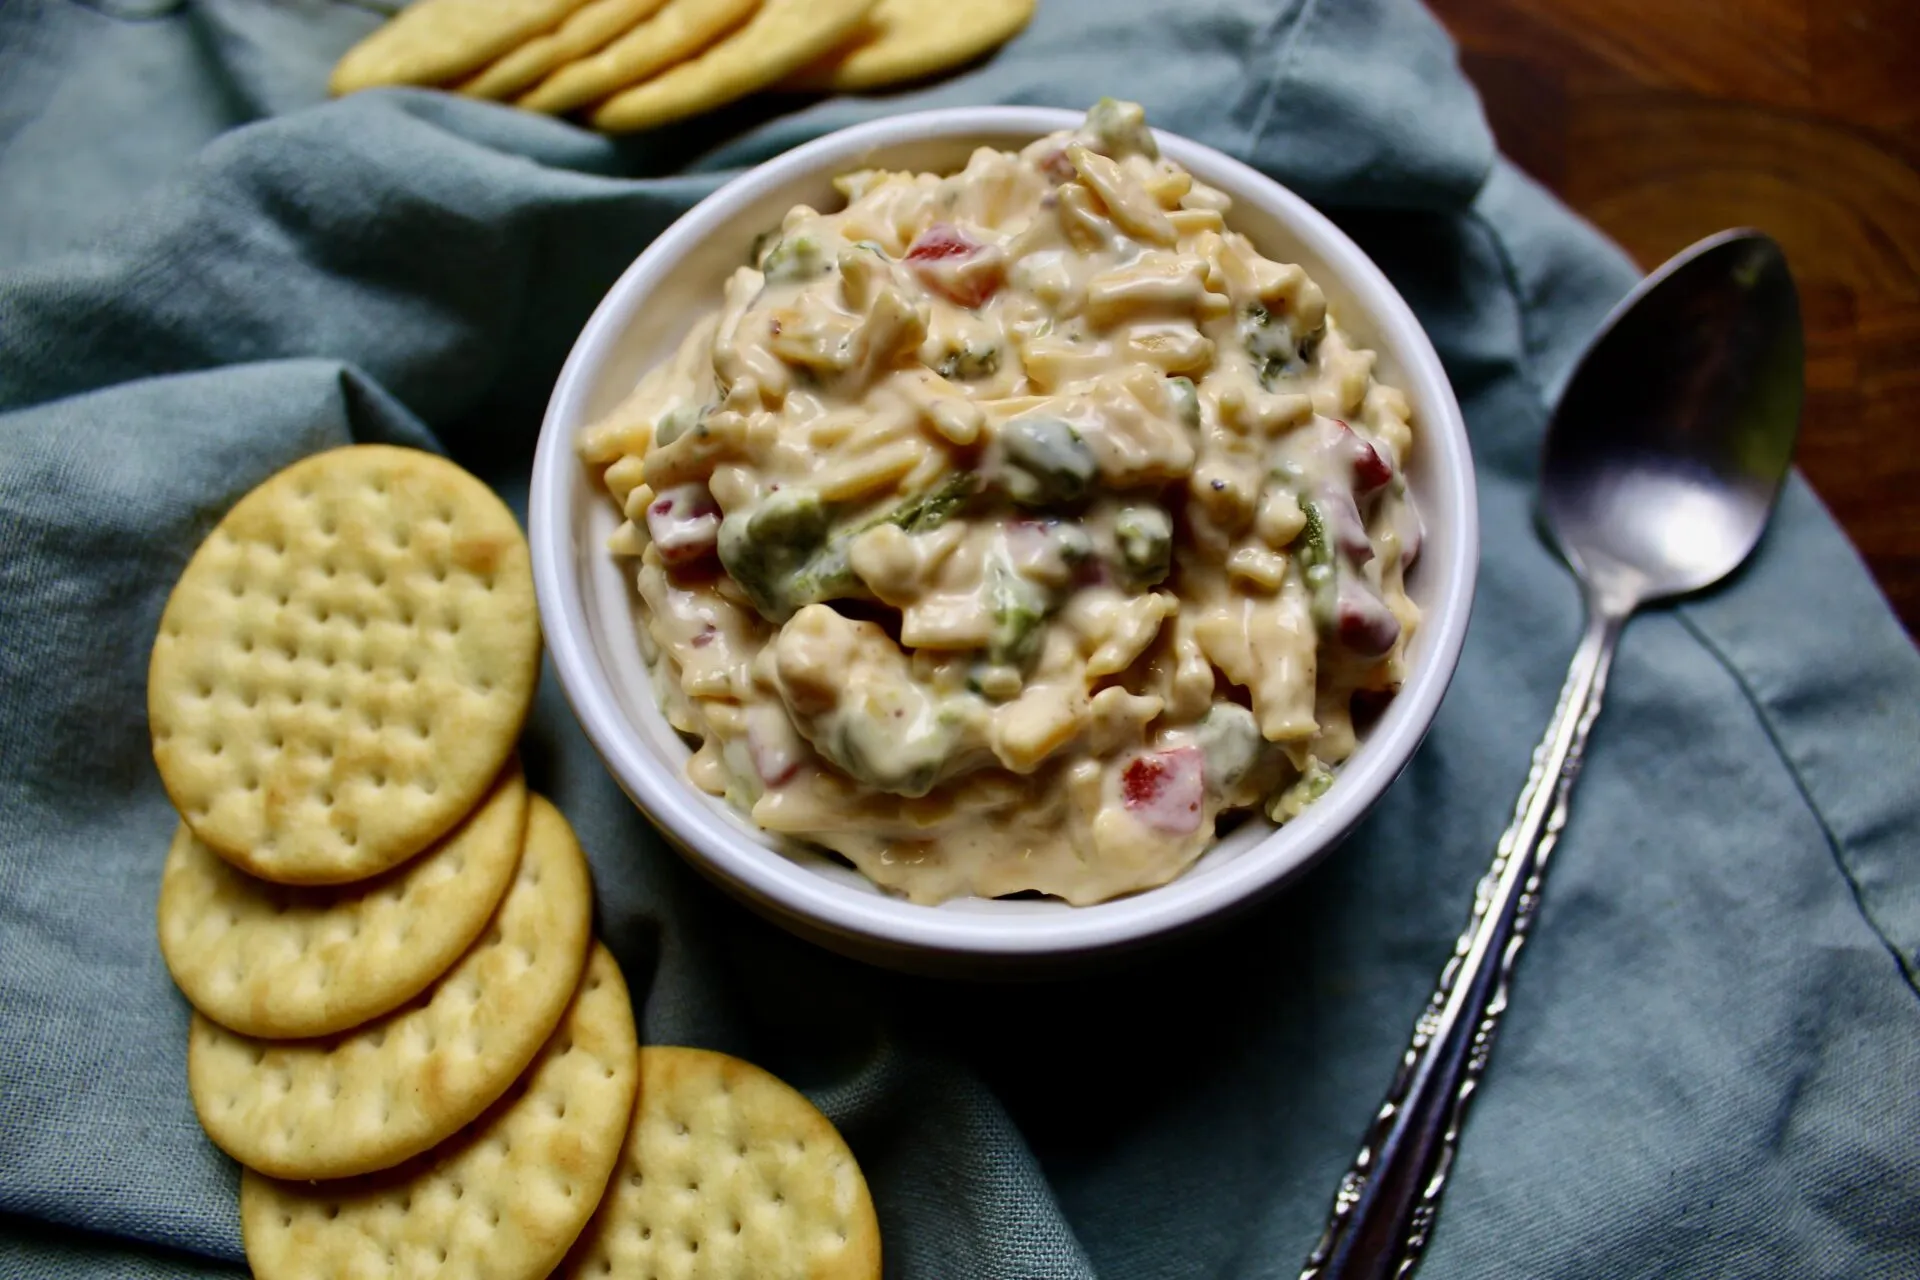 Blistered Hot Pepper and Pimento Cheese Spread